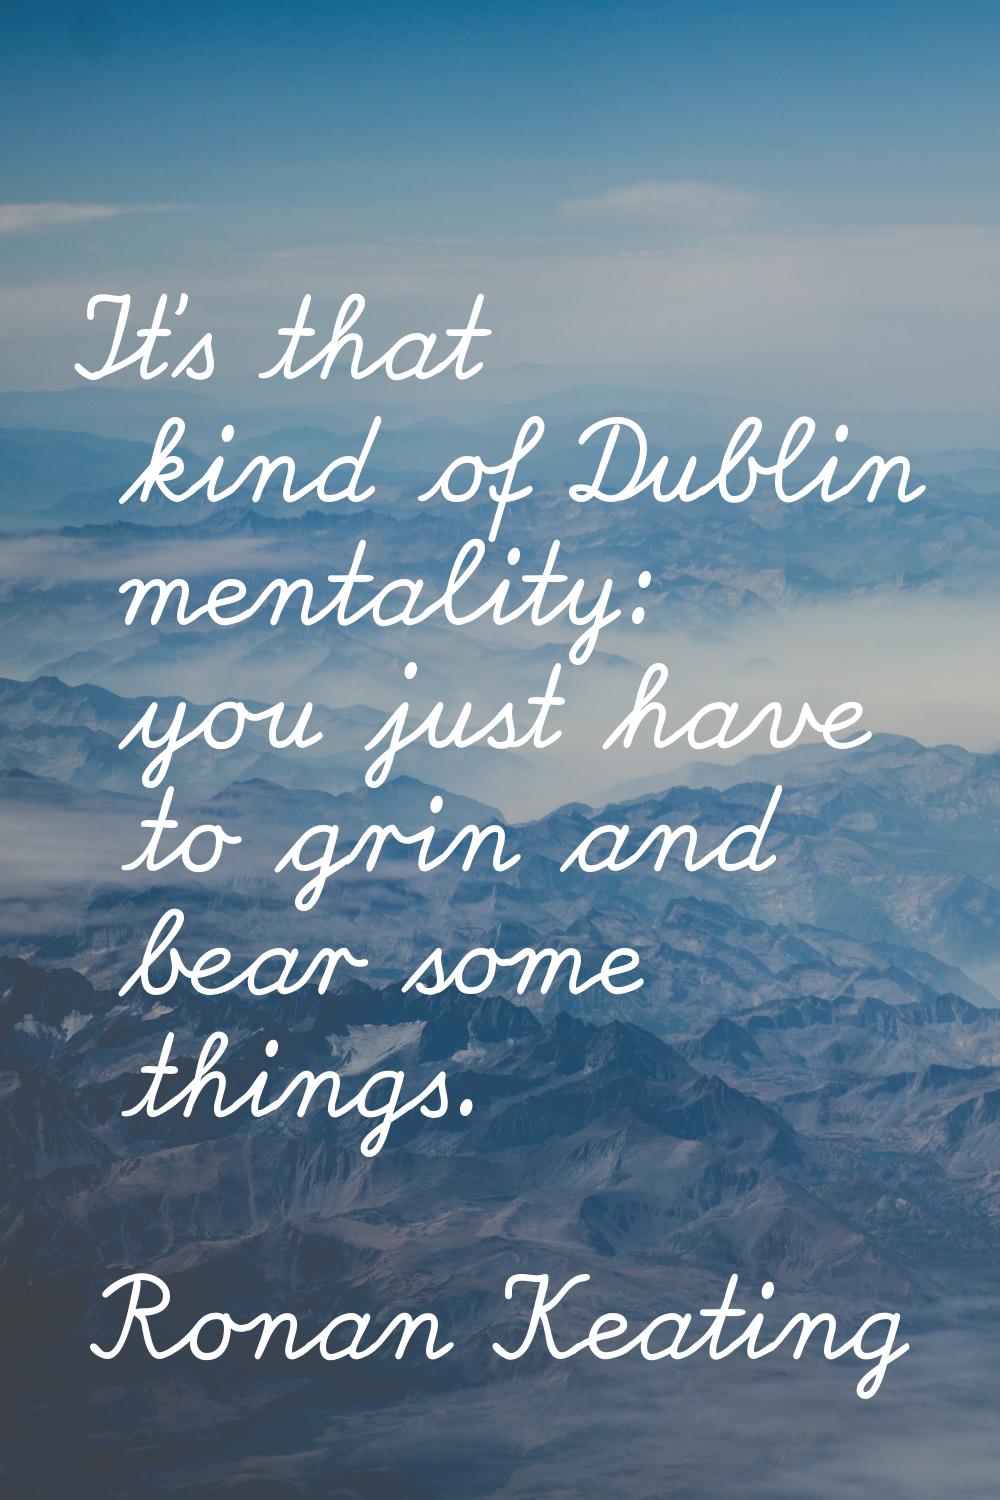 It's that kind of Dublin mentality: you just have to grin and bear some things.